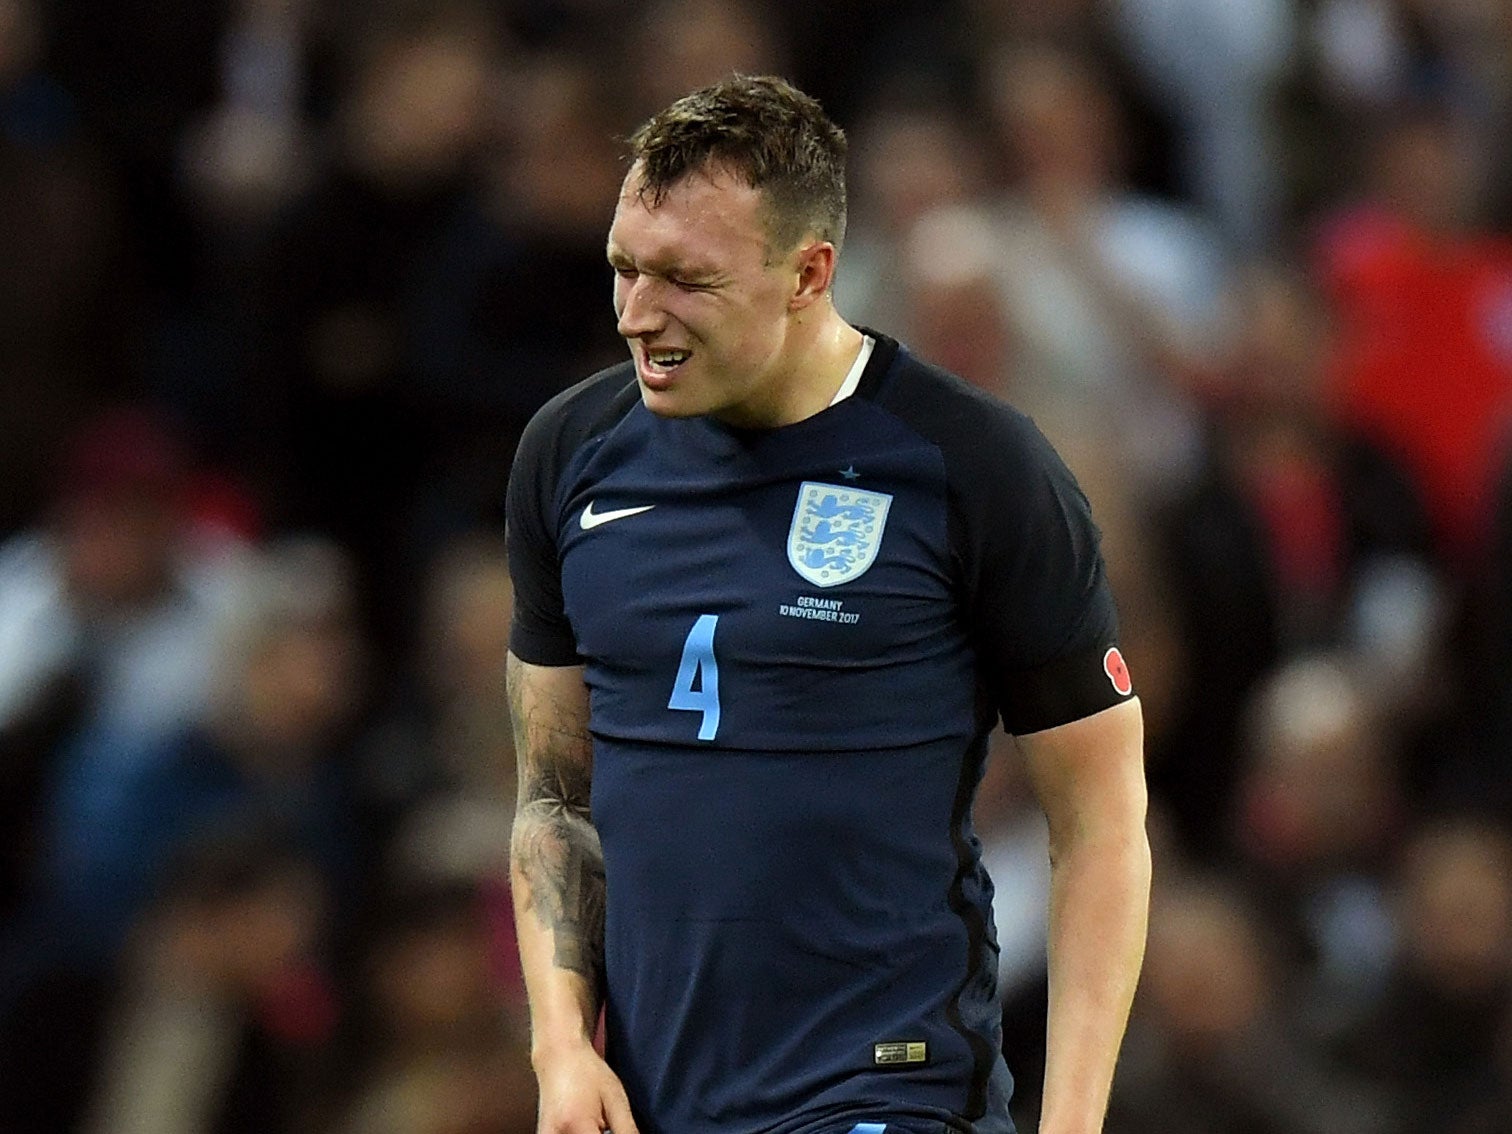 Phil Jones limped off the pitch during England's 0-0 draw with Germany